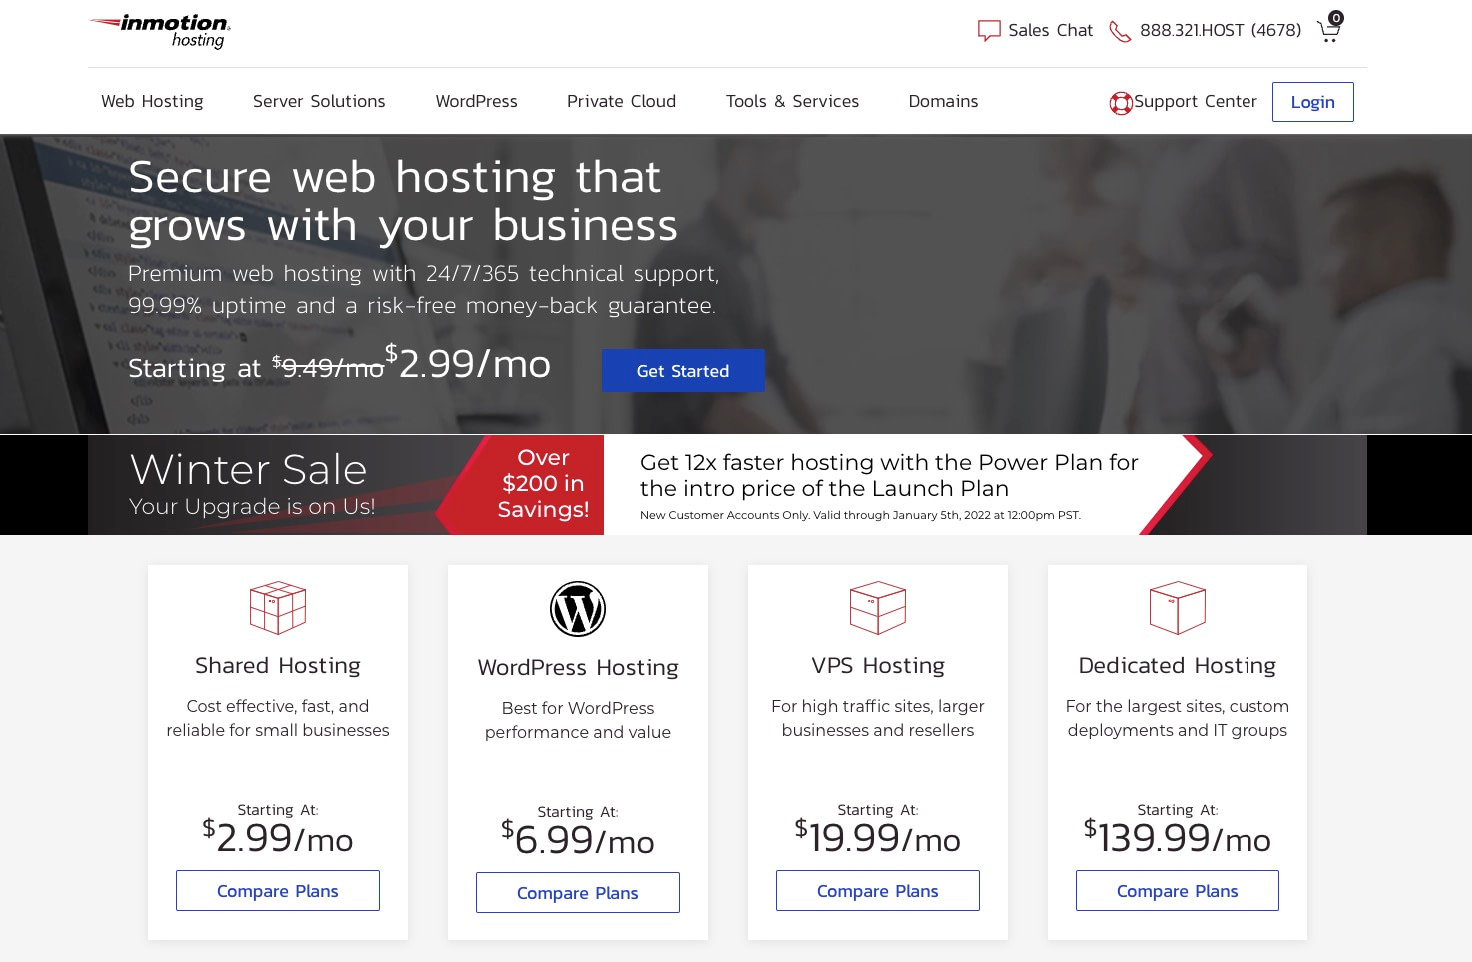 The details for InMotion's student discounted hosting